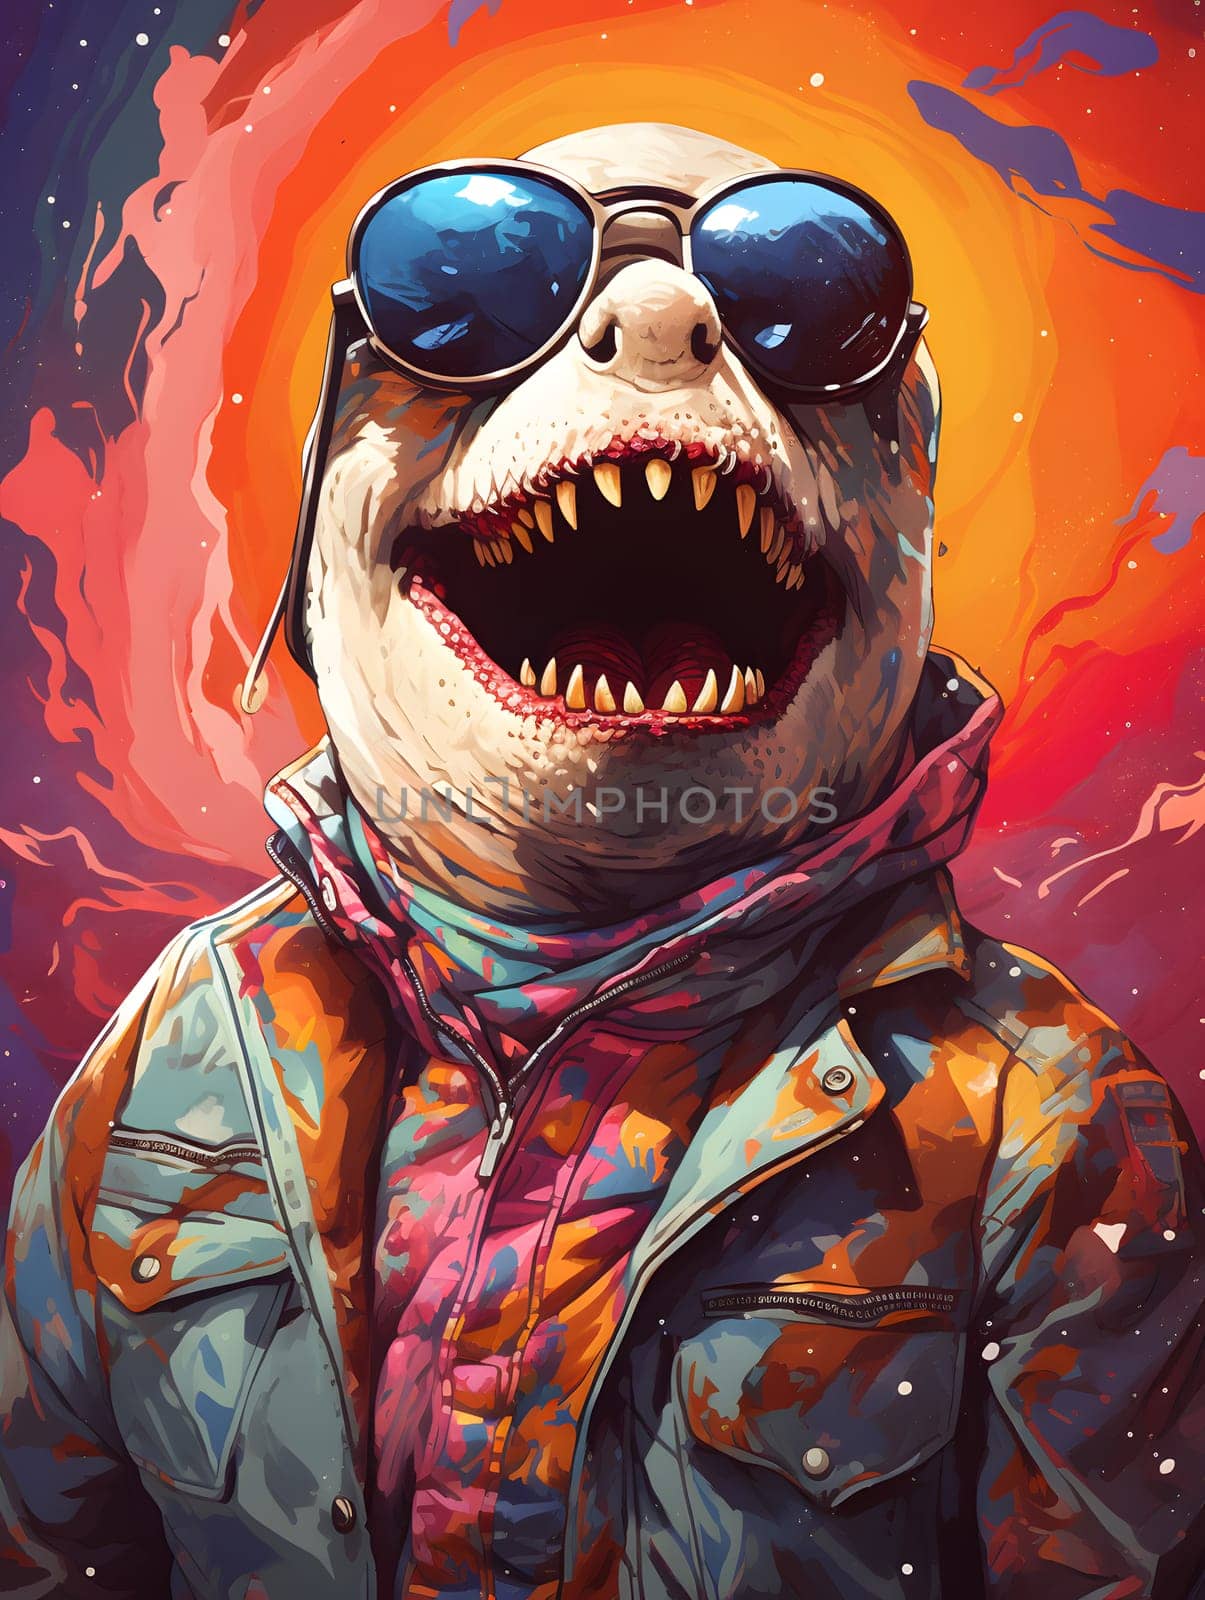 A vibrant painting featuring a bear sporting stylish sunglasses and a trendy jacket, exuding a hip and groovy vibe. The bear stands out against a colorful backdrop, making for a fun and quirky art piece.